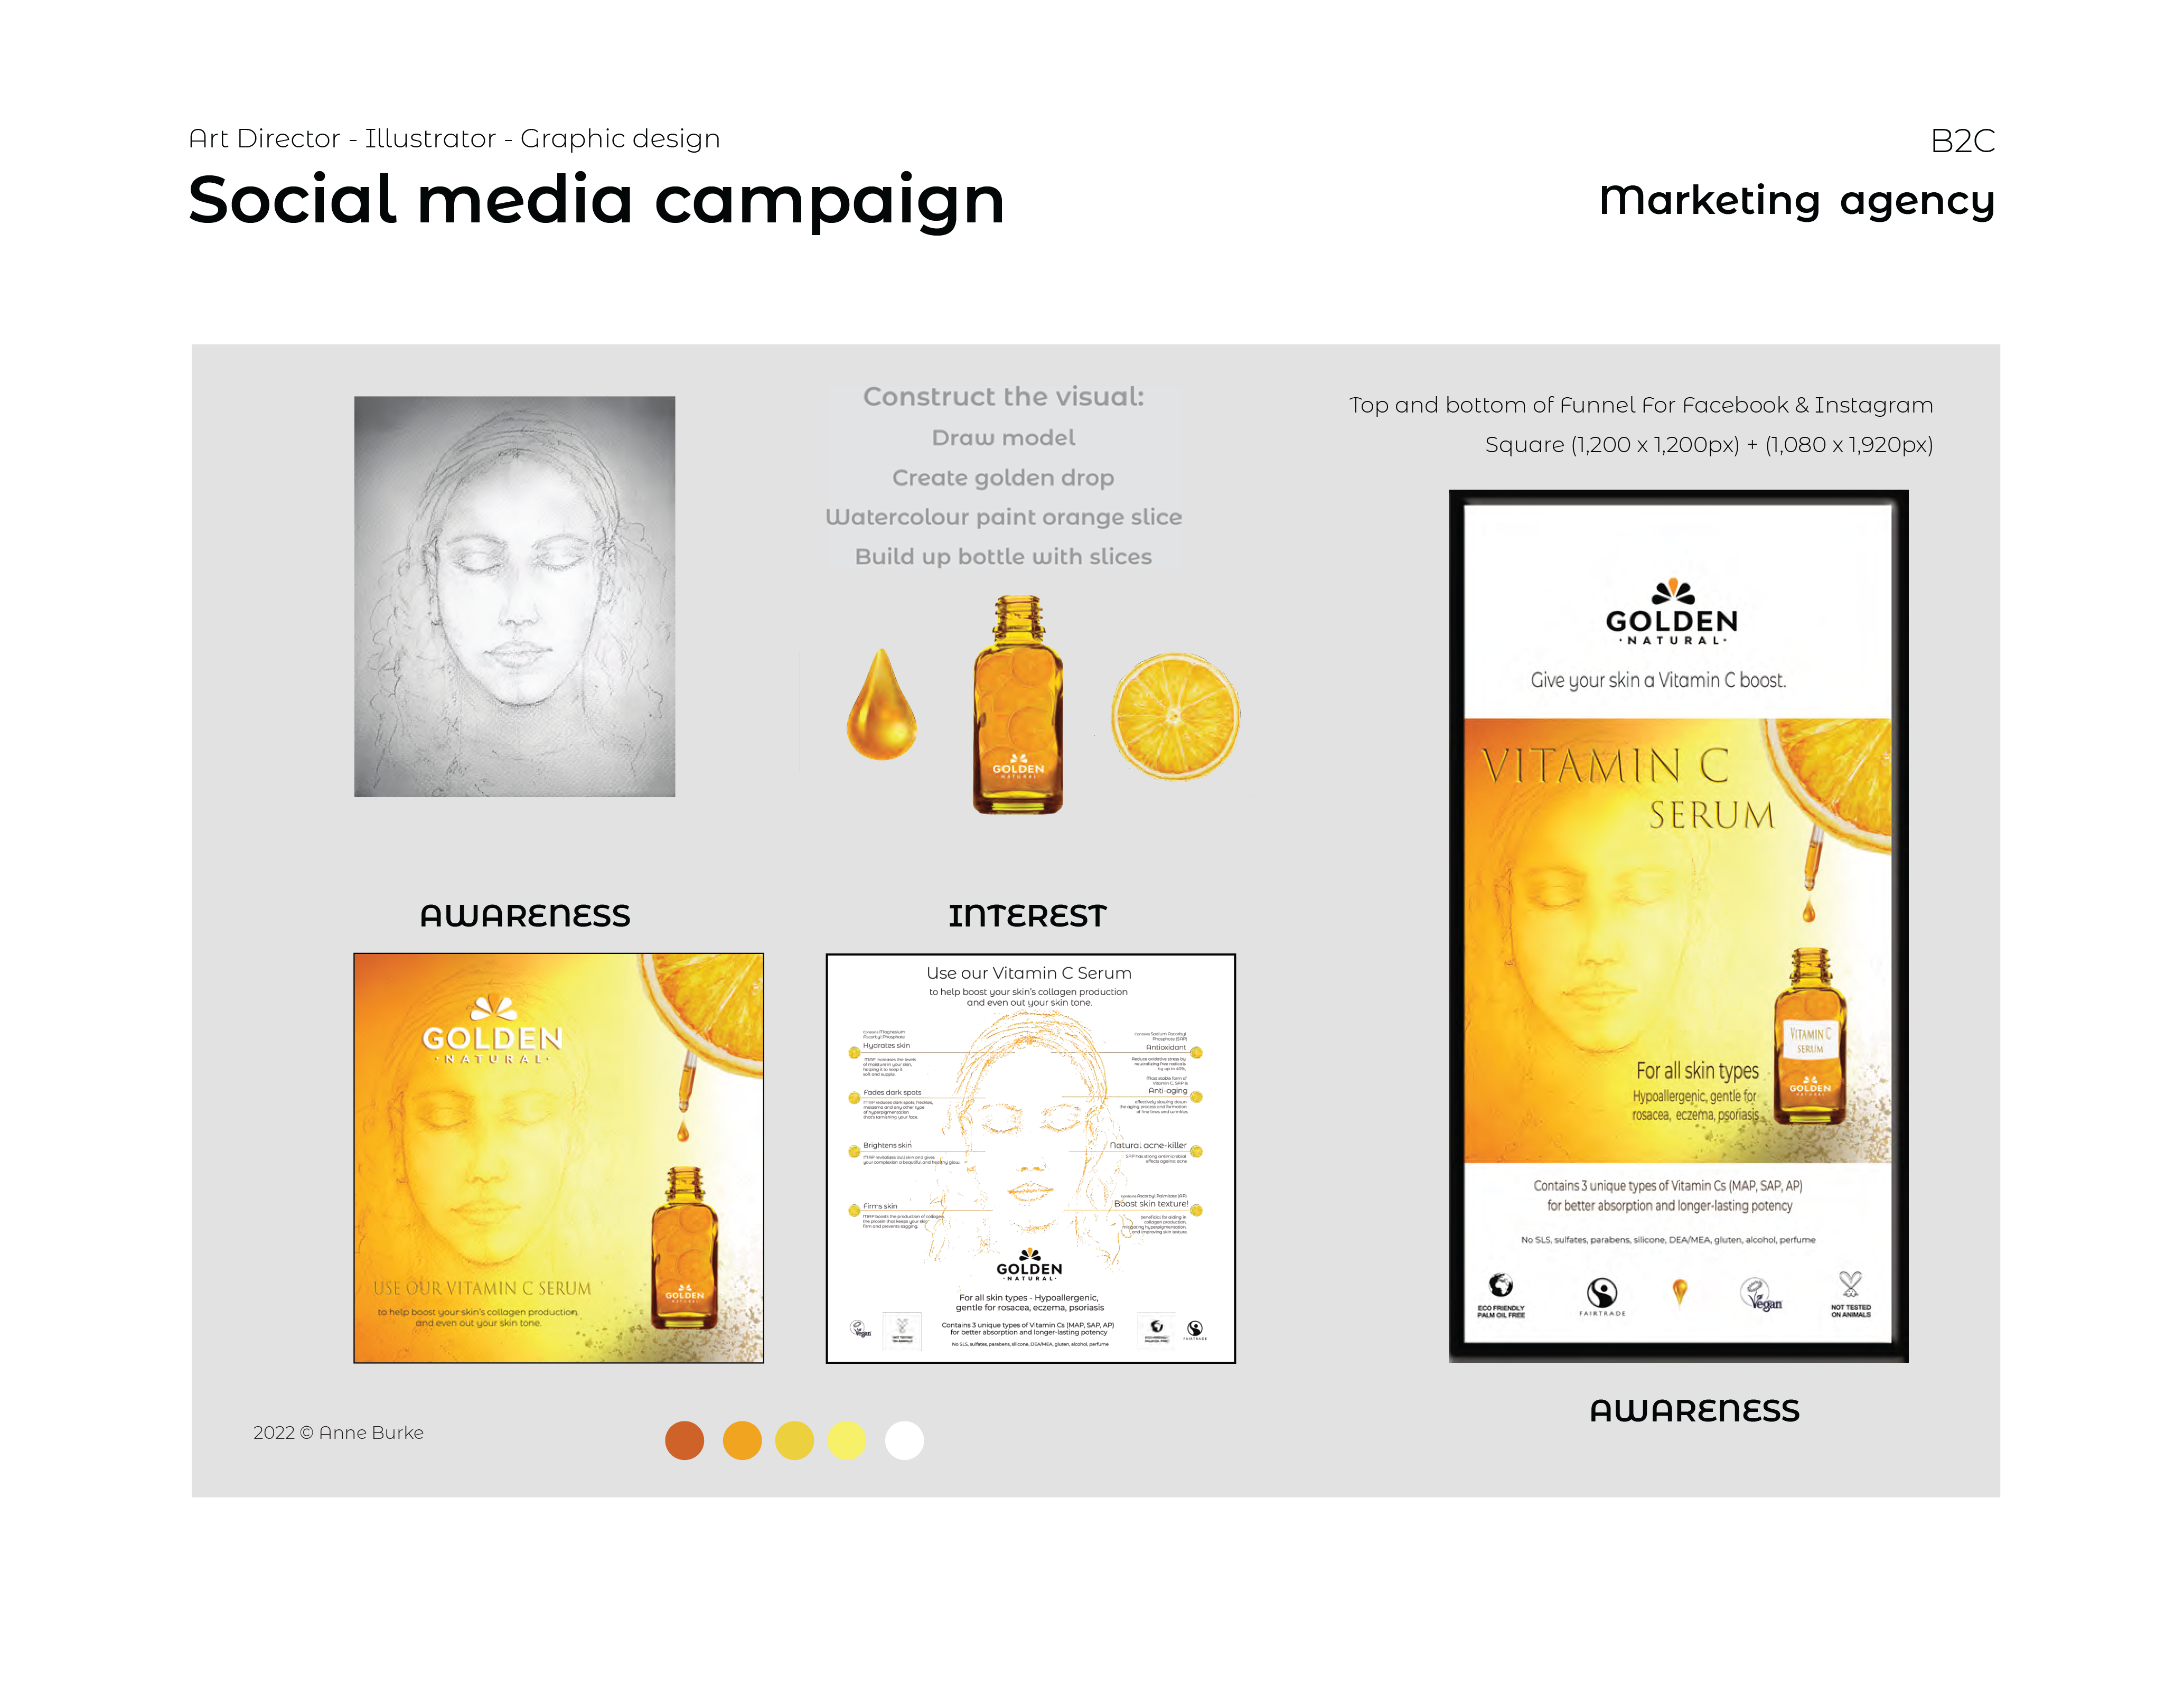 Art Director - Illustrator - Graphic design

B2C
Social media campaign Marketing agency

Construct the visual:
Draw model

Create golden drop

ga

atercolour paint orange slice

Build up bottle with slices

u

Use our Vitamin C Serum

10 help boost your skin's collogen procuction
and even cut your s